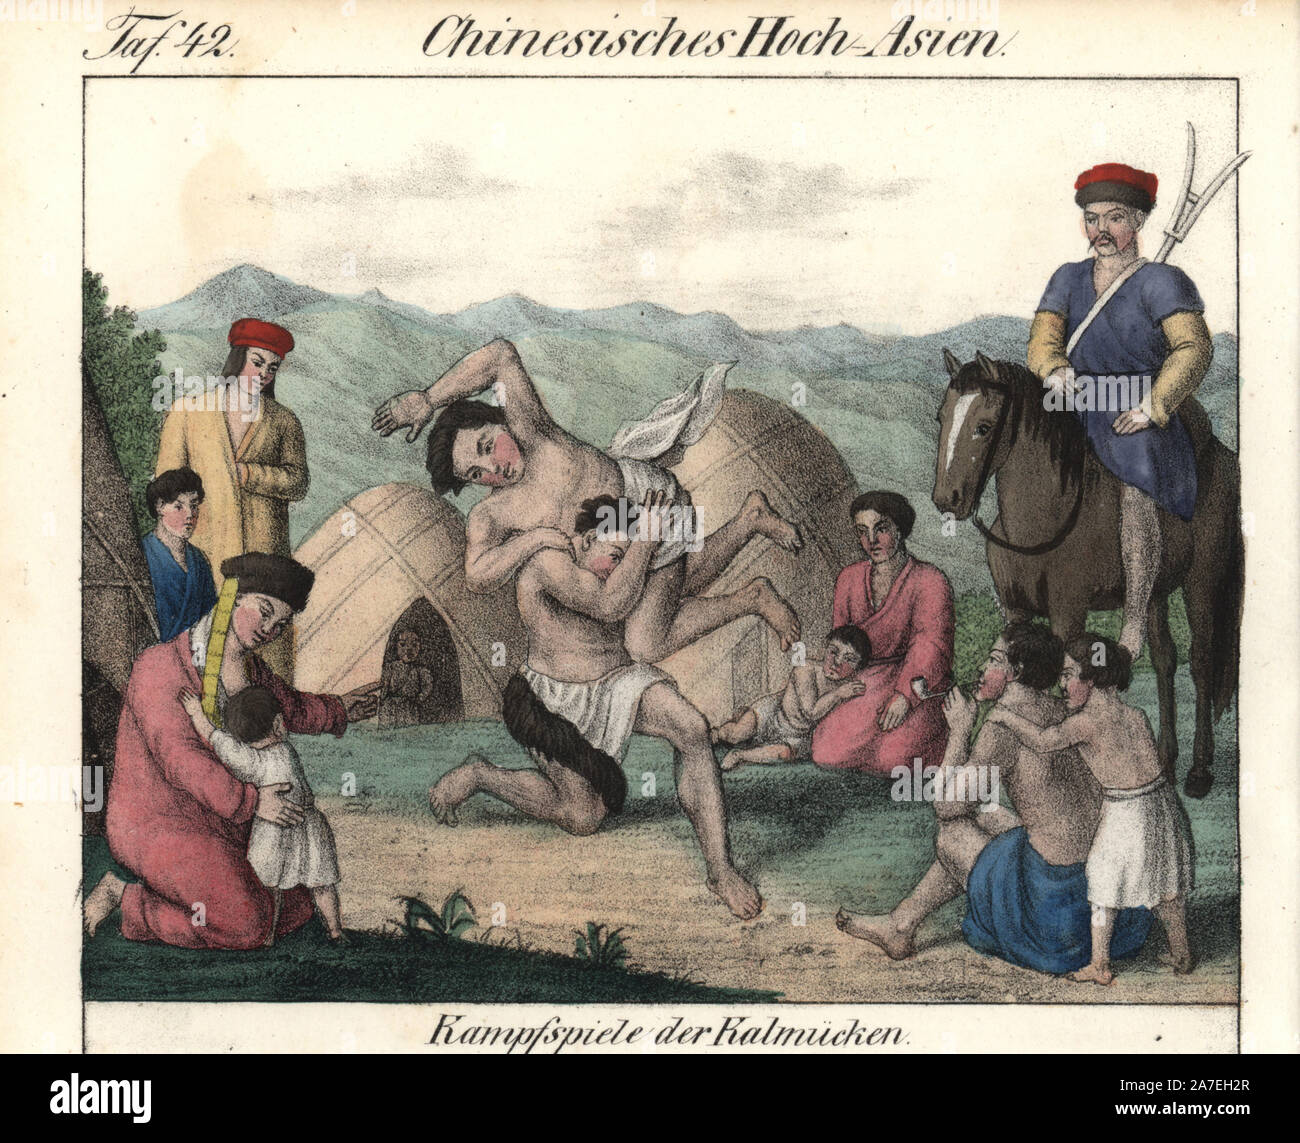 Kalmyk men wrestling in front of their families and ghers, with a man on horseback watching. Handcoloured lithograph from Friedrich Wilhelm Goedsche's 'Vollstaendige Völkergallerie in getreuen Abbildungen' (Complete Gallery of Peoples in True Pictures), Meissen, circa 1835-1840. Goedsche (1785-1863) was a German writer, bookseller and publisher in Meissen. Many of the illustrations were adapted from Bertuch's 'Bilderbuch fur Kinder' and others. Stock Photo